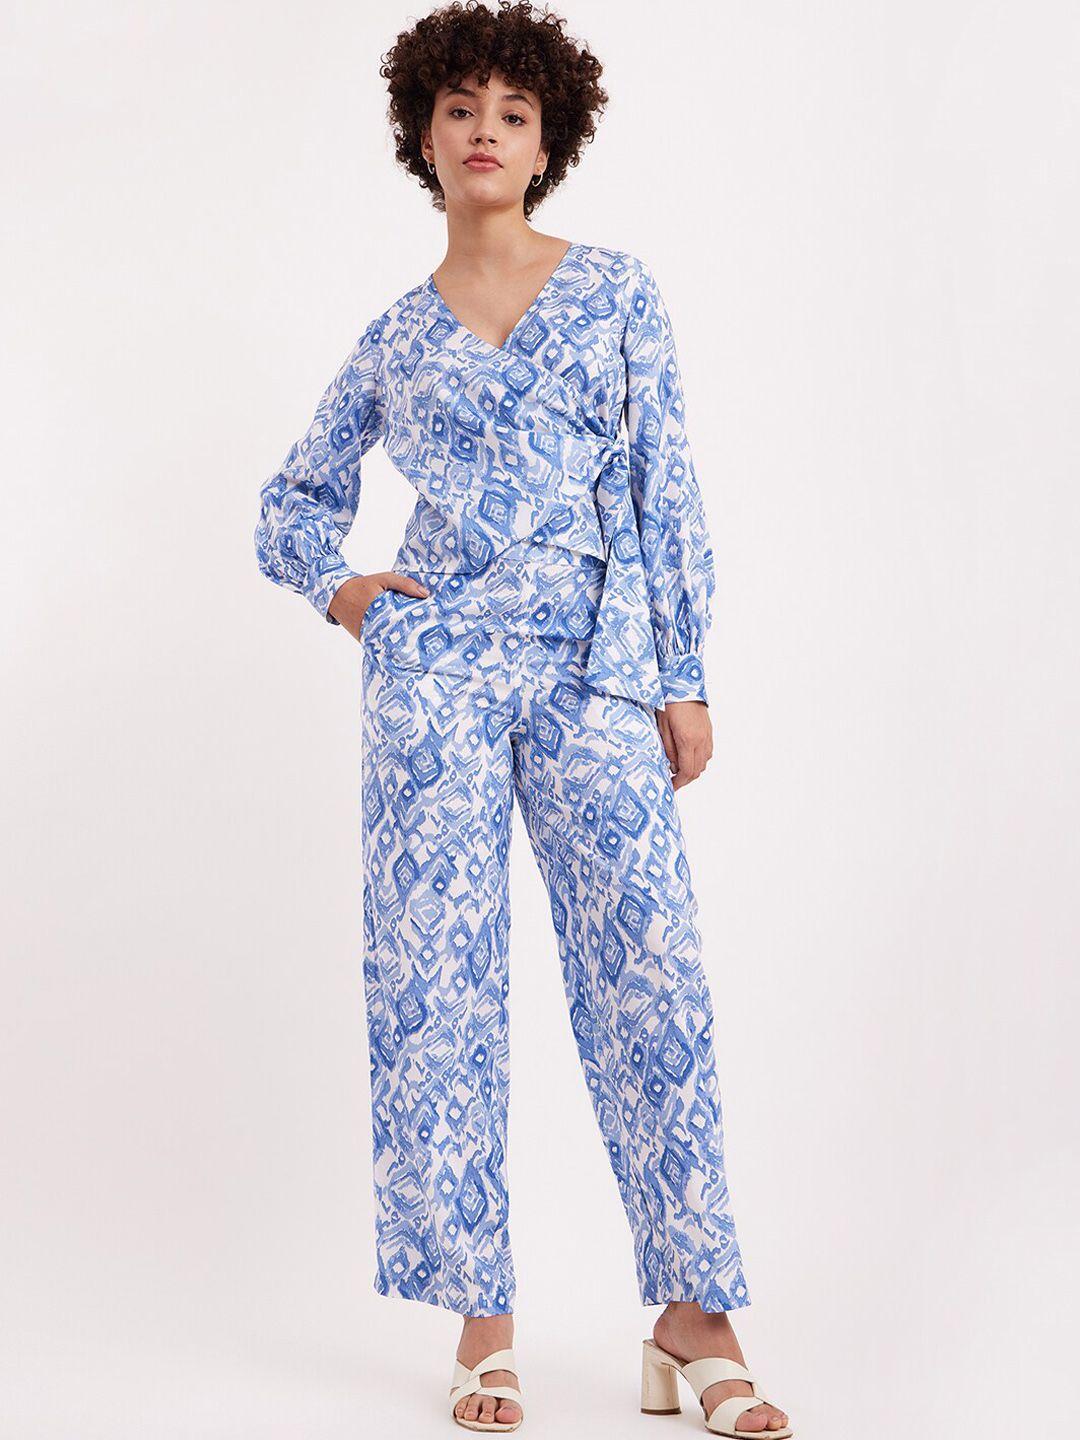 fablestreet printed v-neck top & trousers